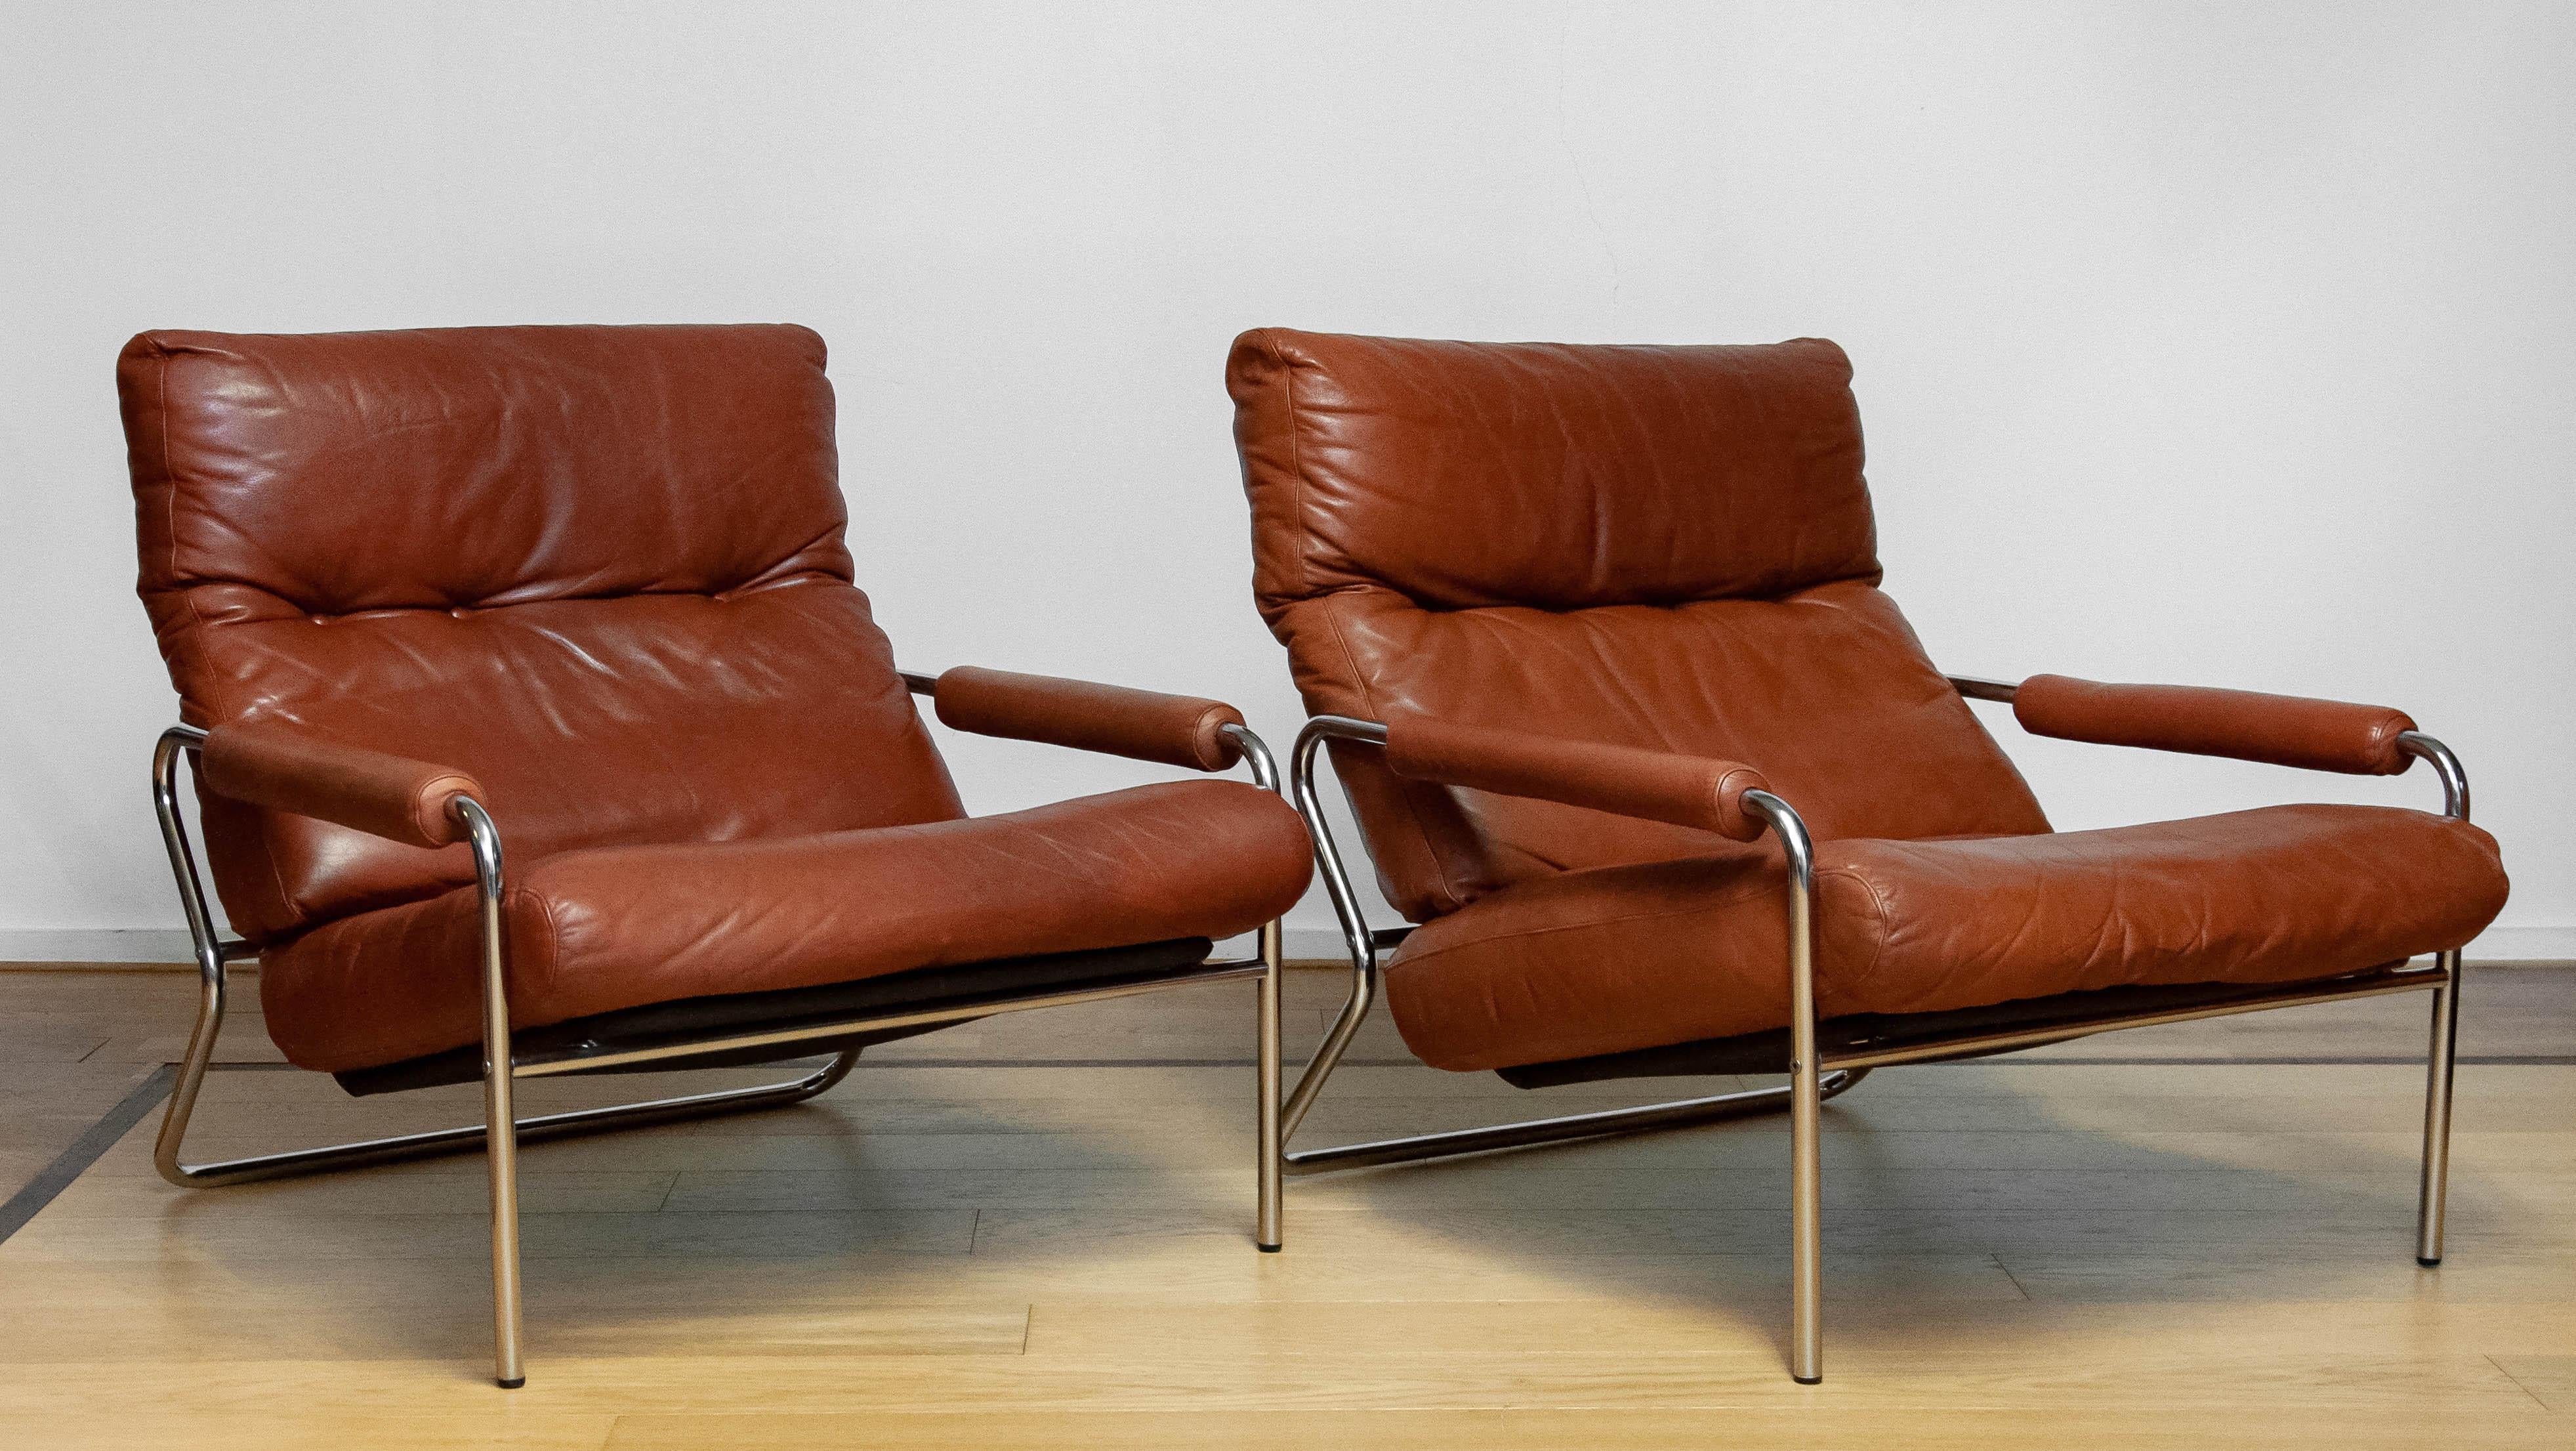 Beautiful pair Scandinavian Modern tubular lounge chairs with brown leather cushions and brown leather armrests from the 1960s made in Sweden.
The leather is for both chairs in good condition even as the fillings and therefor both chair are very